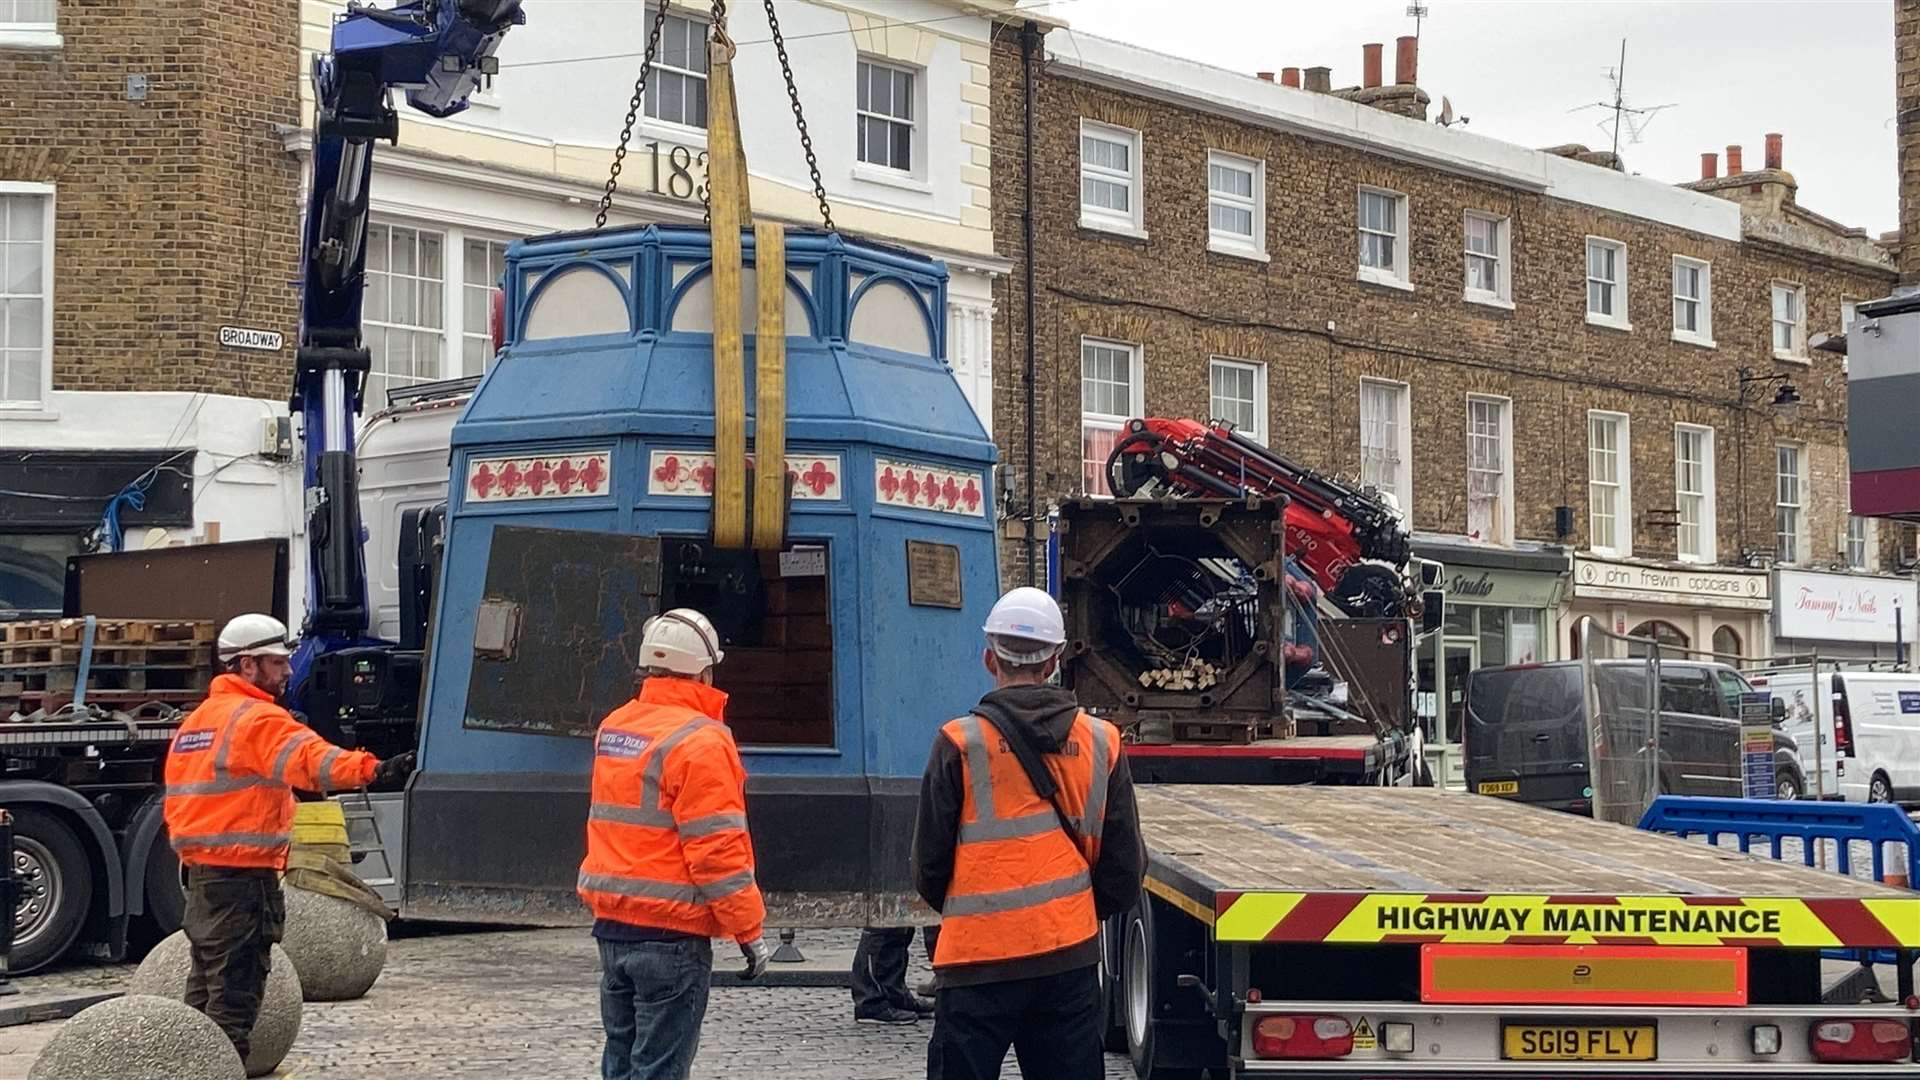 Day Four: The base of the Sheerness clock tower is craned onto a lorry ready to be taken away for restoration